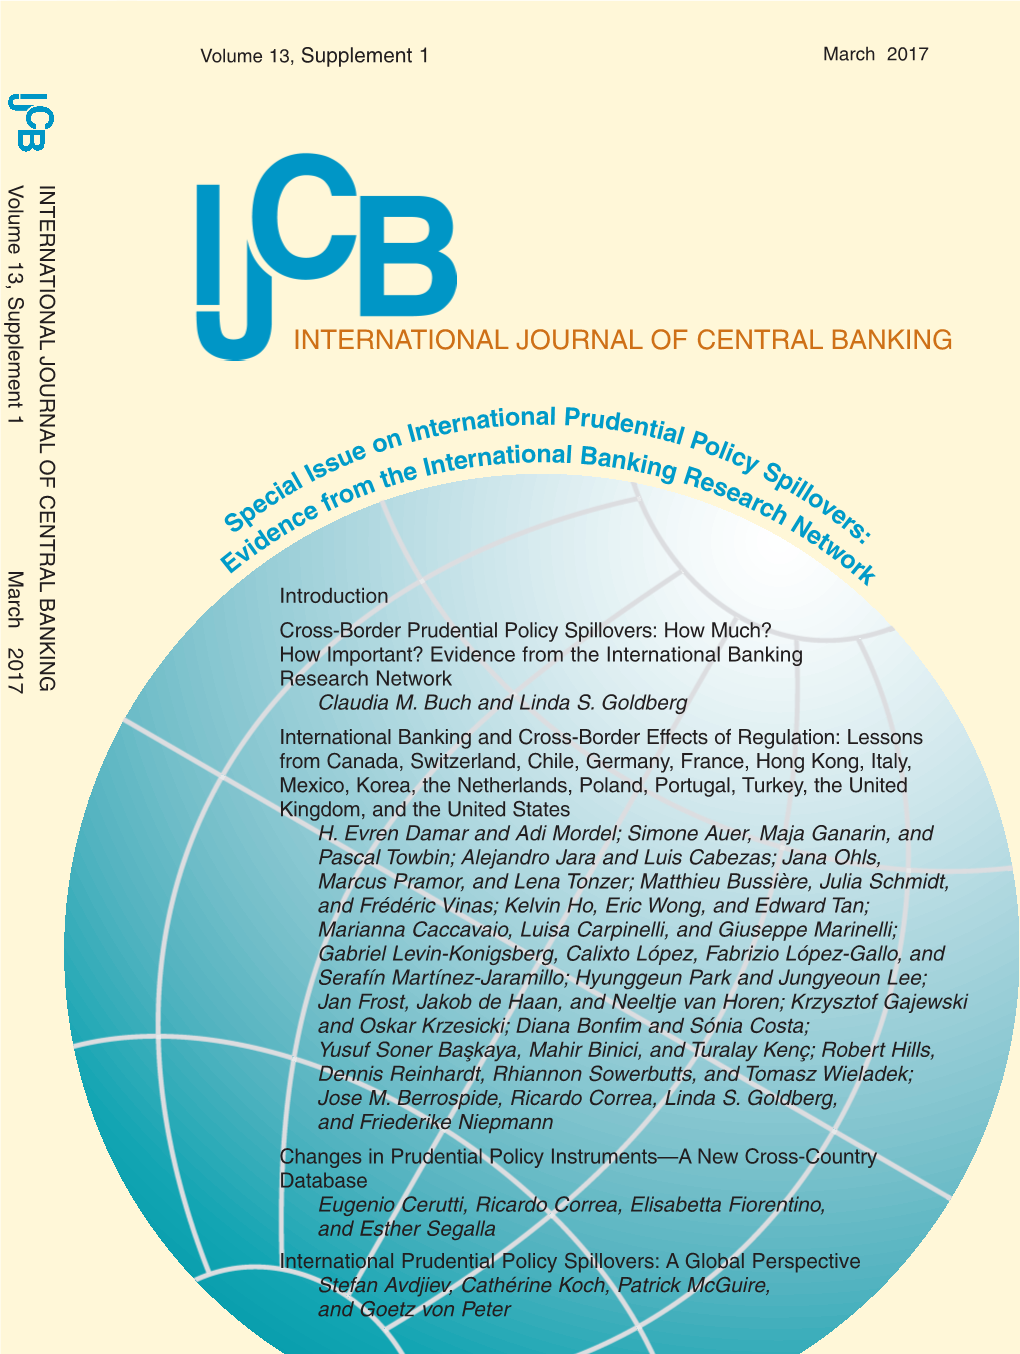 Cover and Contents, IJCB Journal March 2017